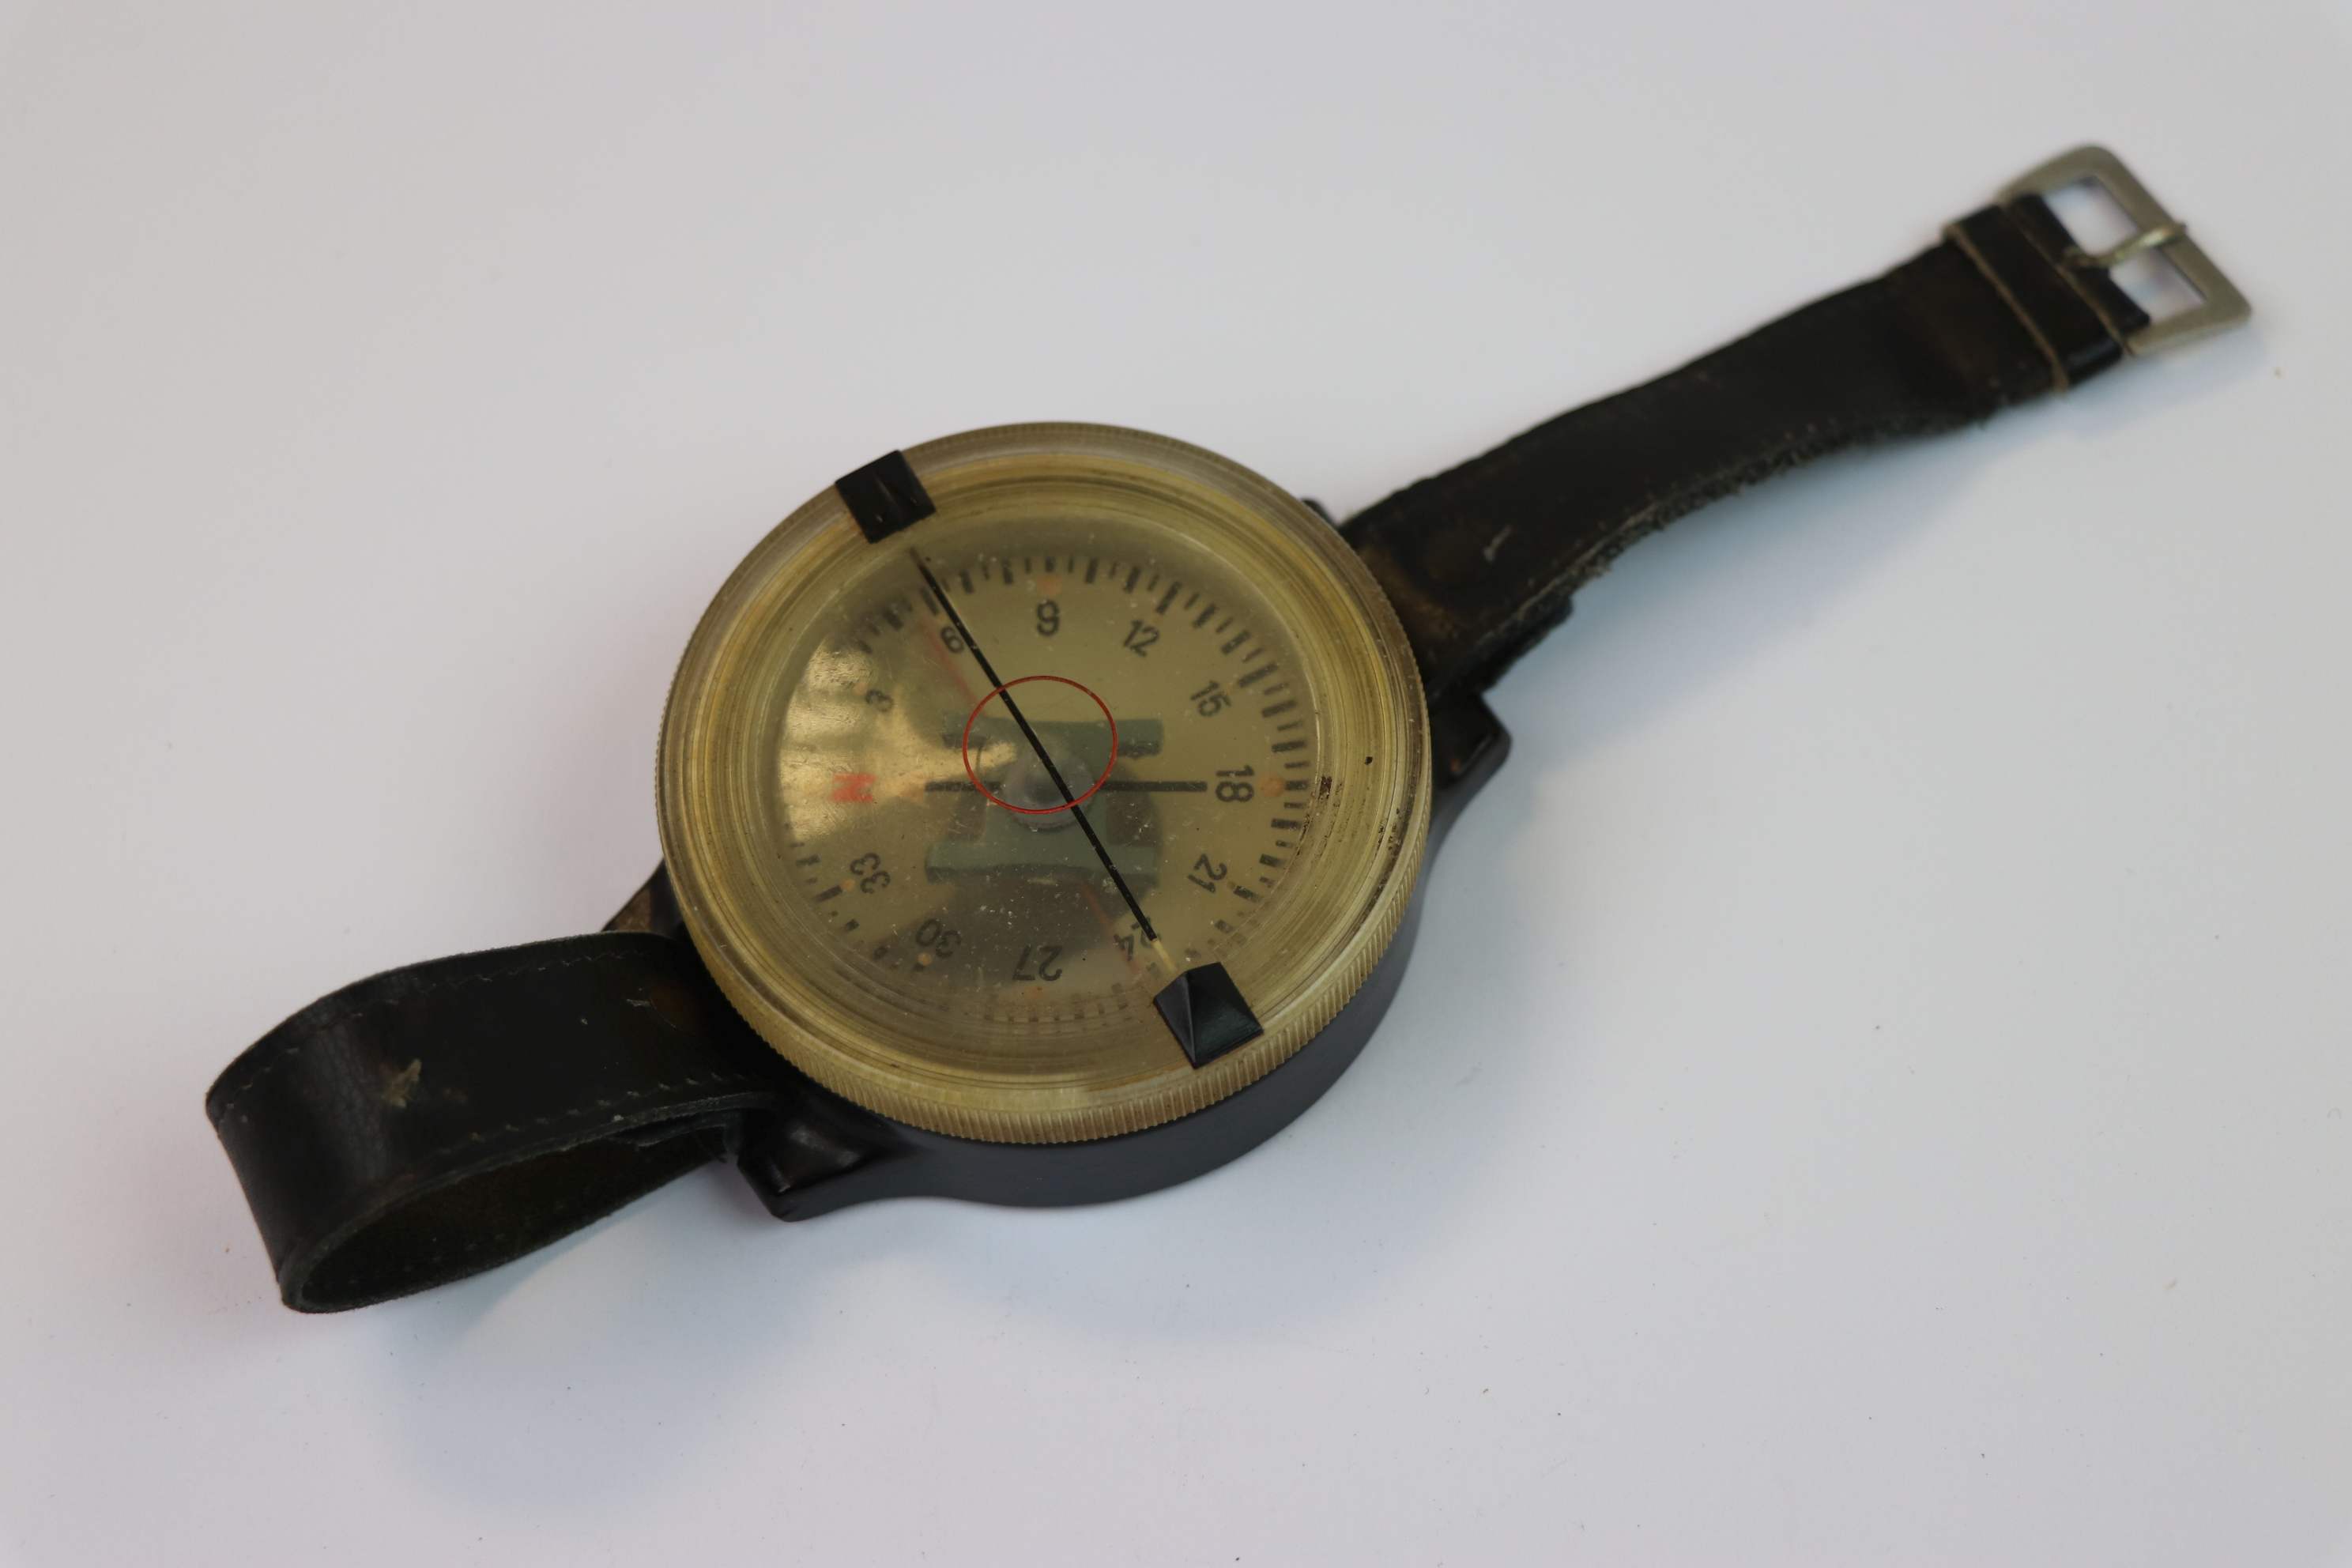 A WW2 German Luftwaffe Wrist Compass With Leather Strap, Markings To The Rear AK 39 FL 23235-1. - Image 2 of 6